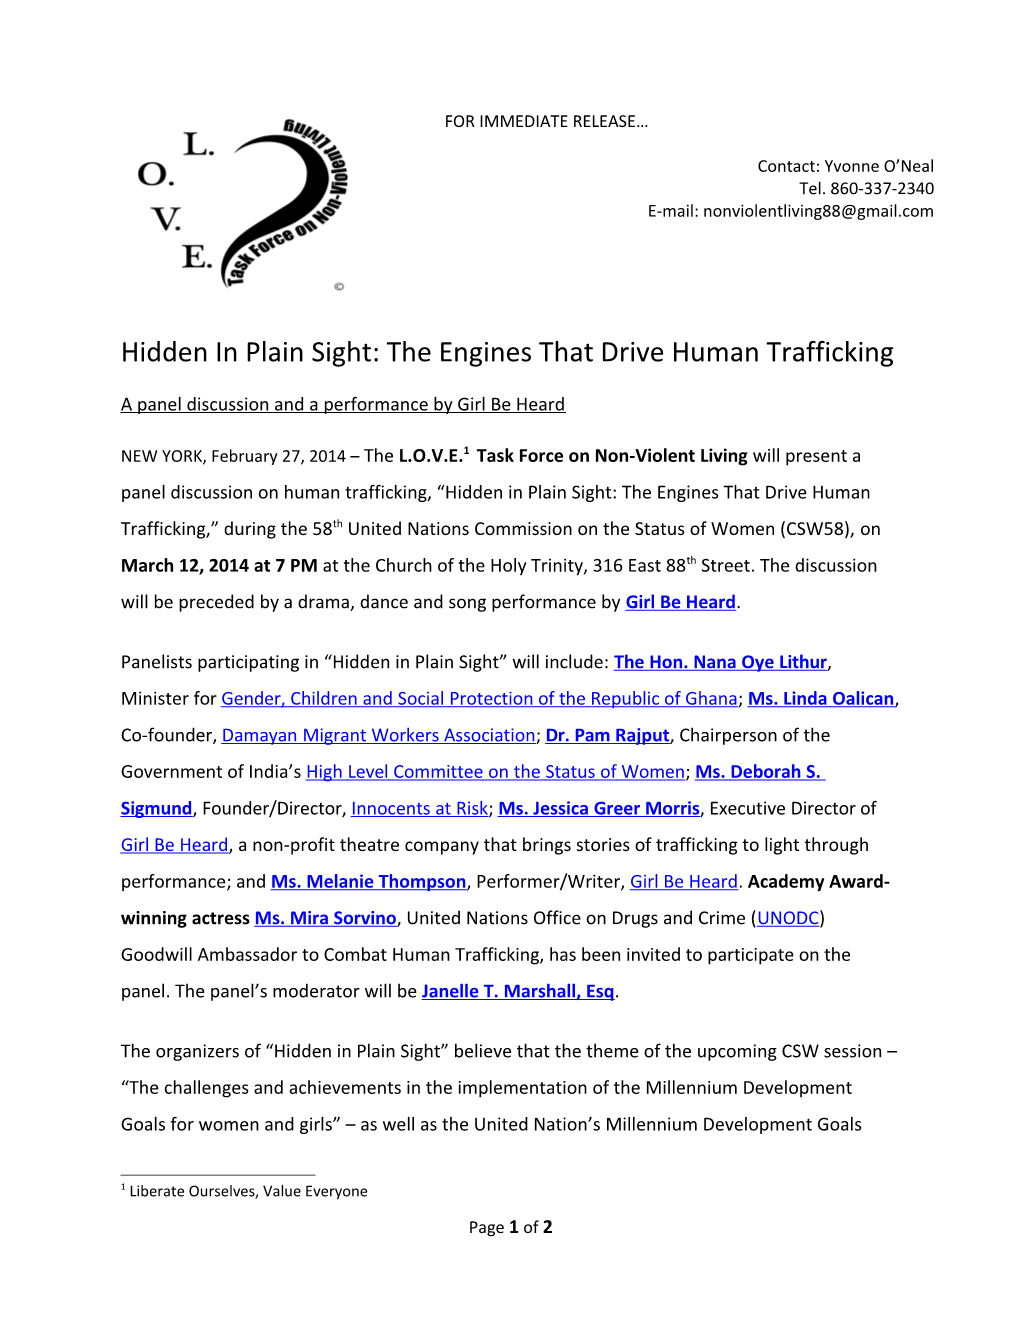 Hidden in Plain Sight: the Engines That Drive Human Trafficking